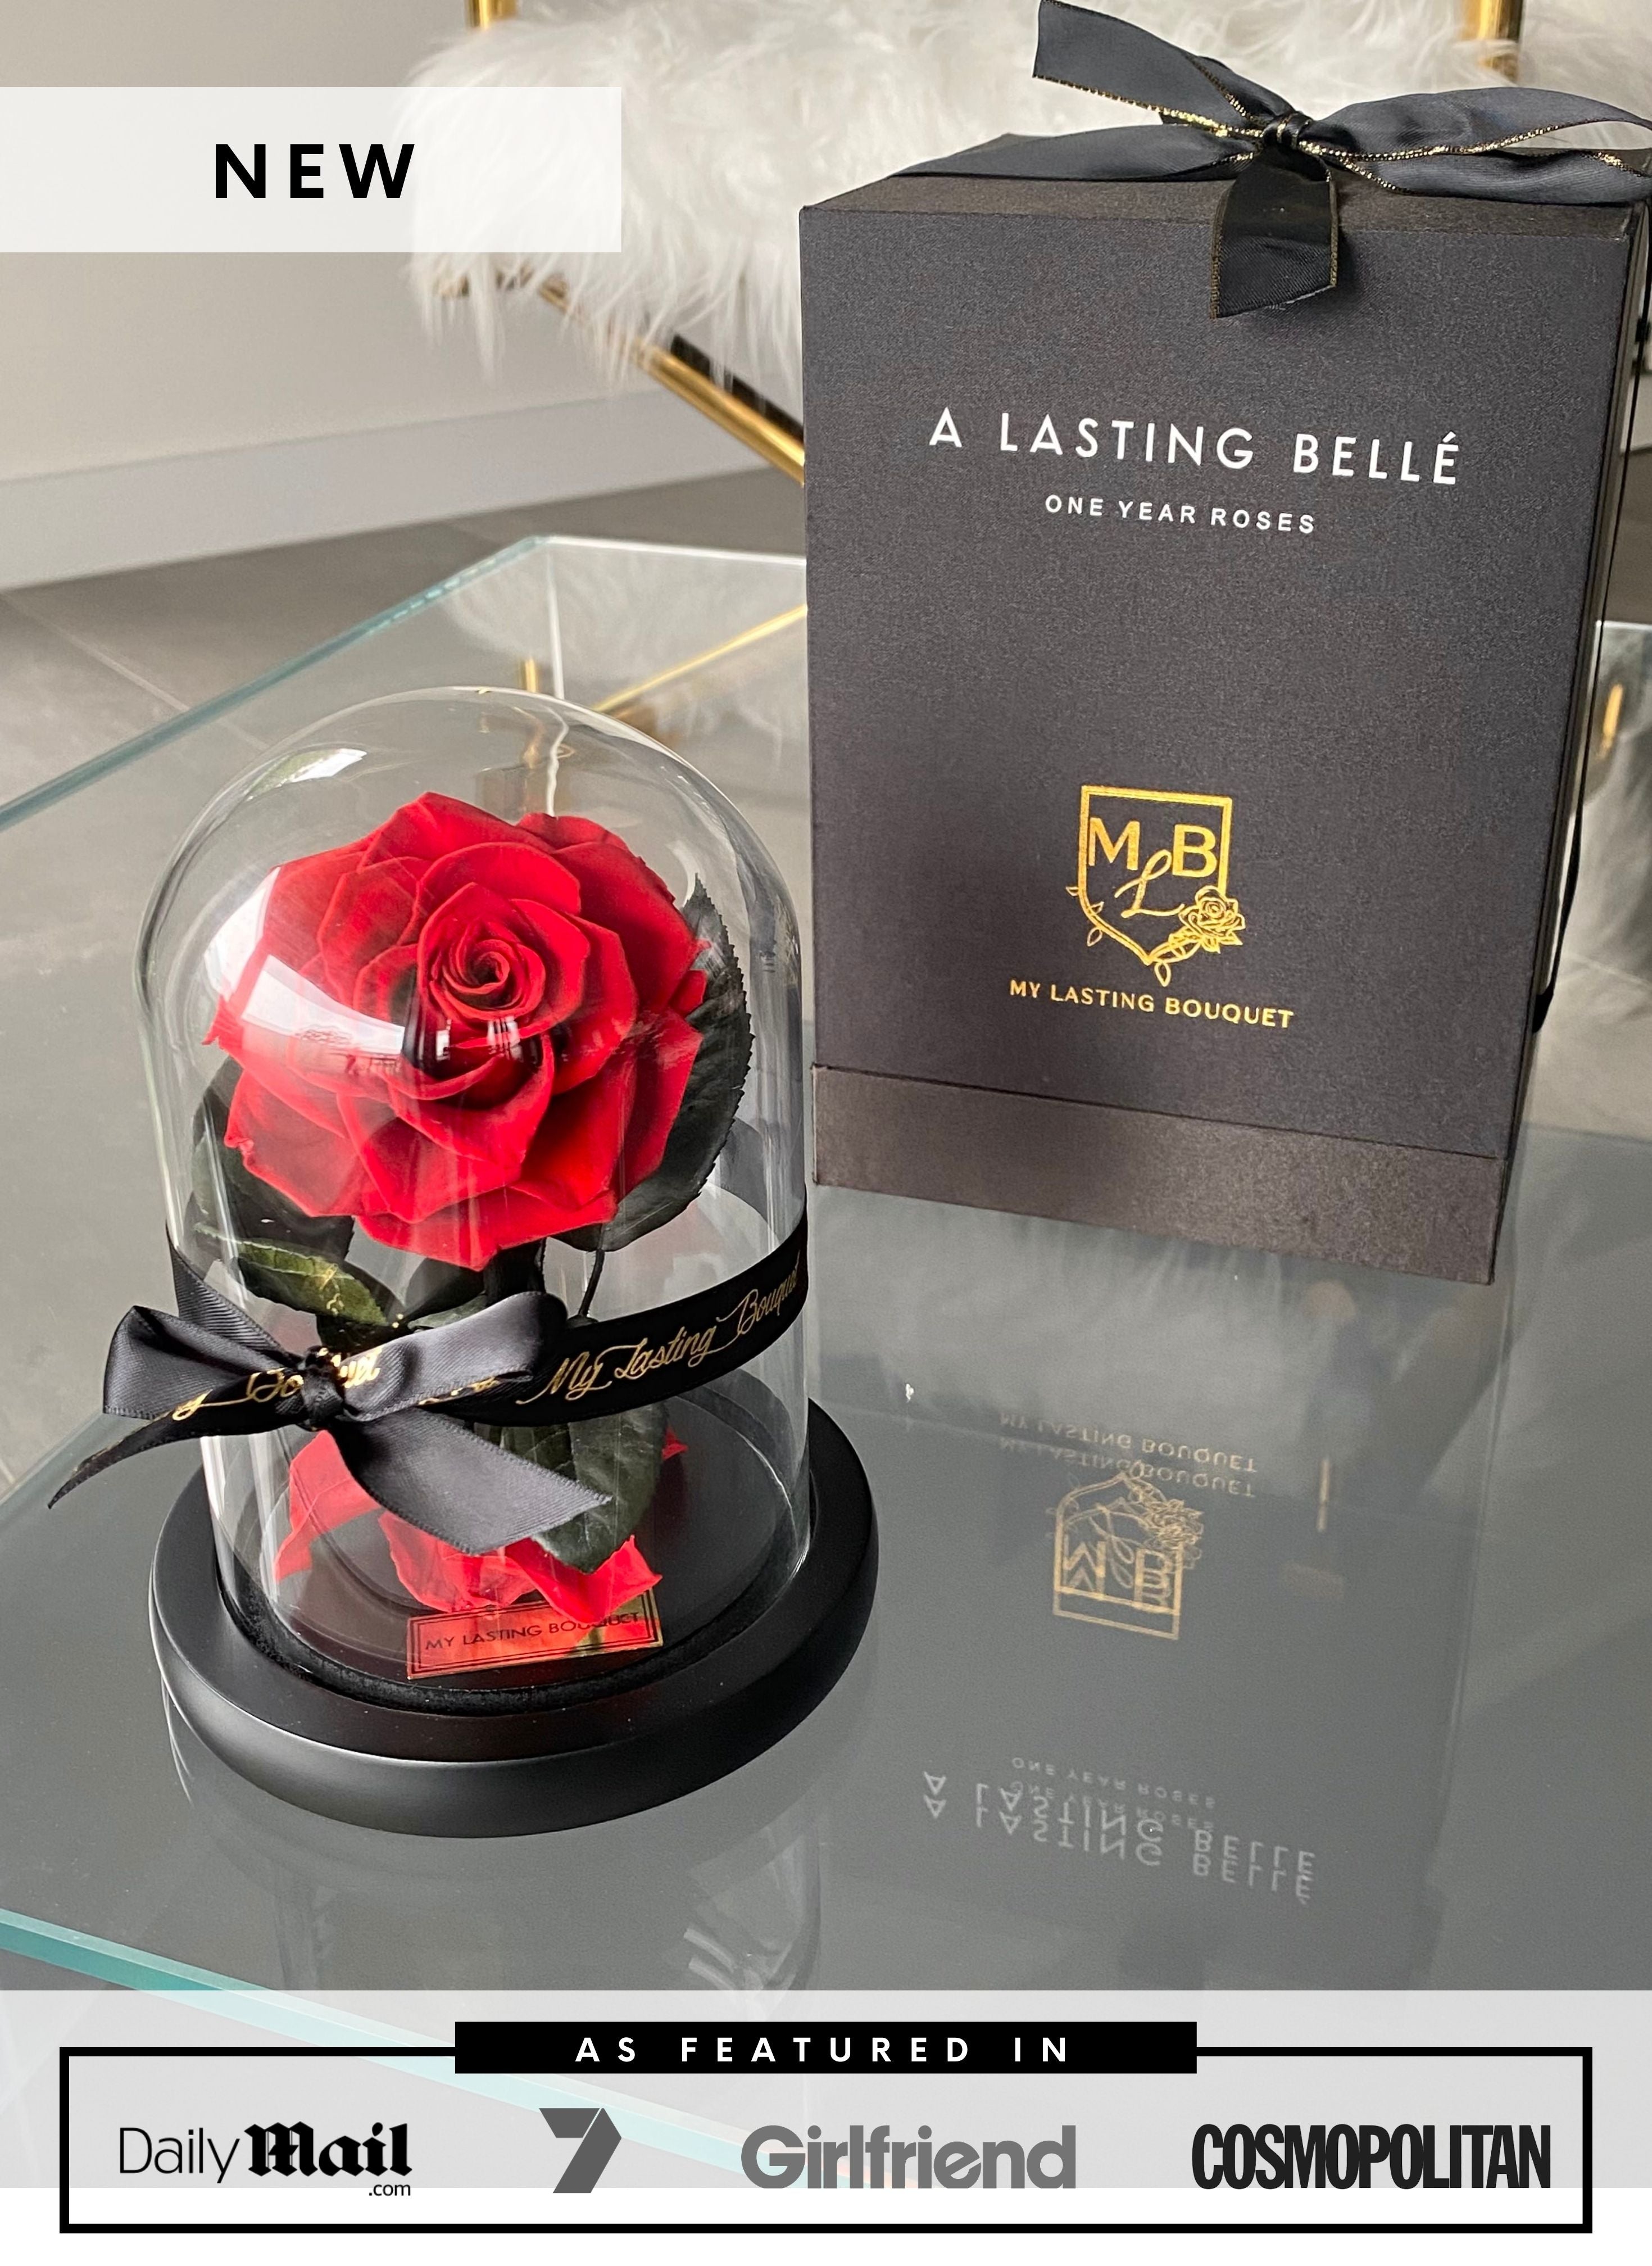 RED Mini Rose Dome - My Lasting Bouquet